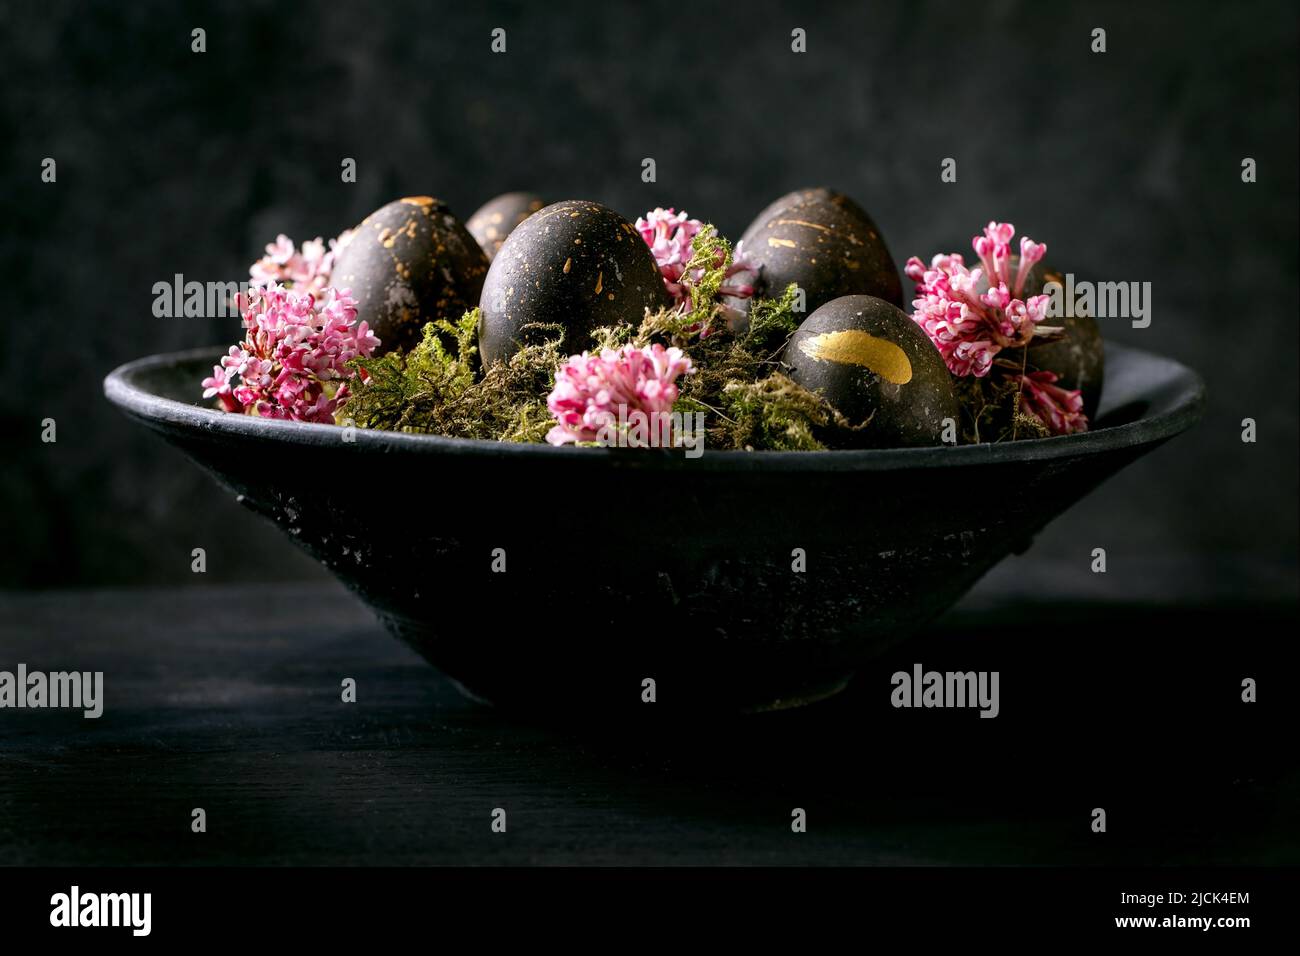 Black Easter concept. Bio colored black eggs with golden spots laying on wild moss with small pink flowers in black ceramic bowl on dark wooden backgr Stock Photo